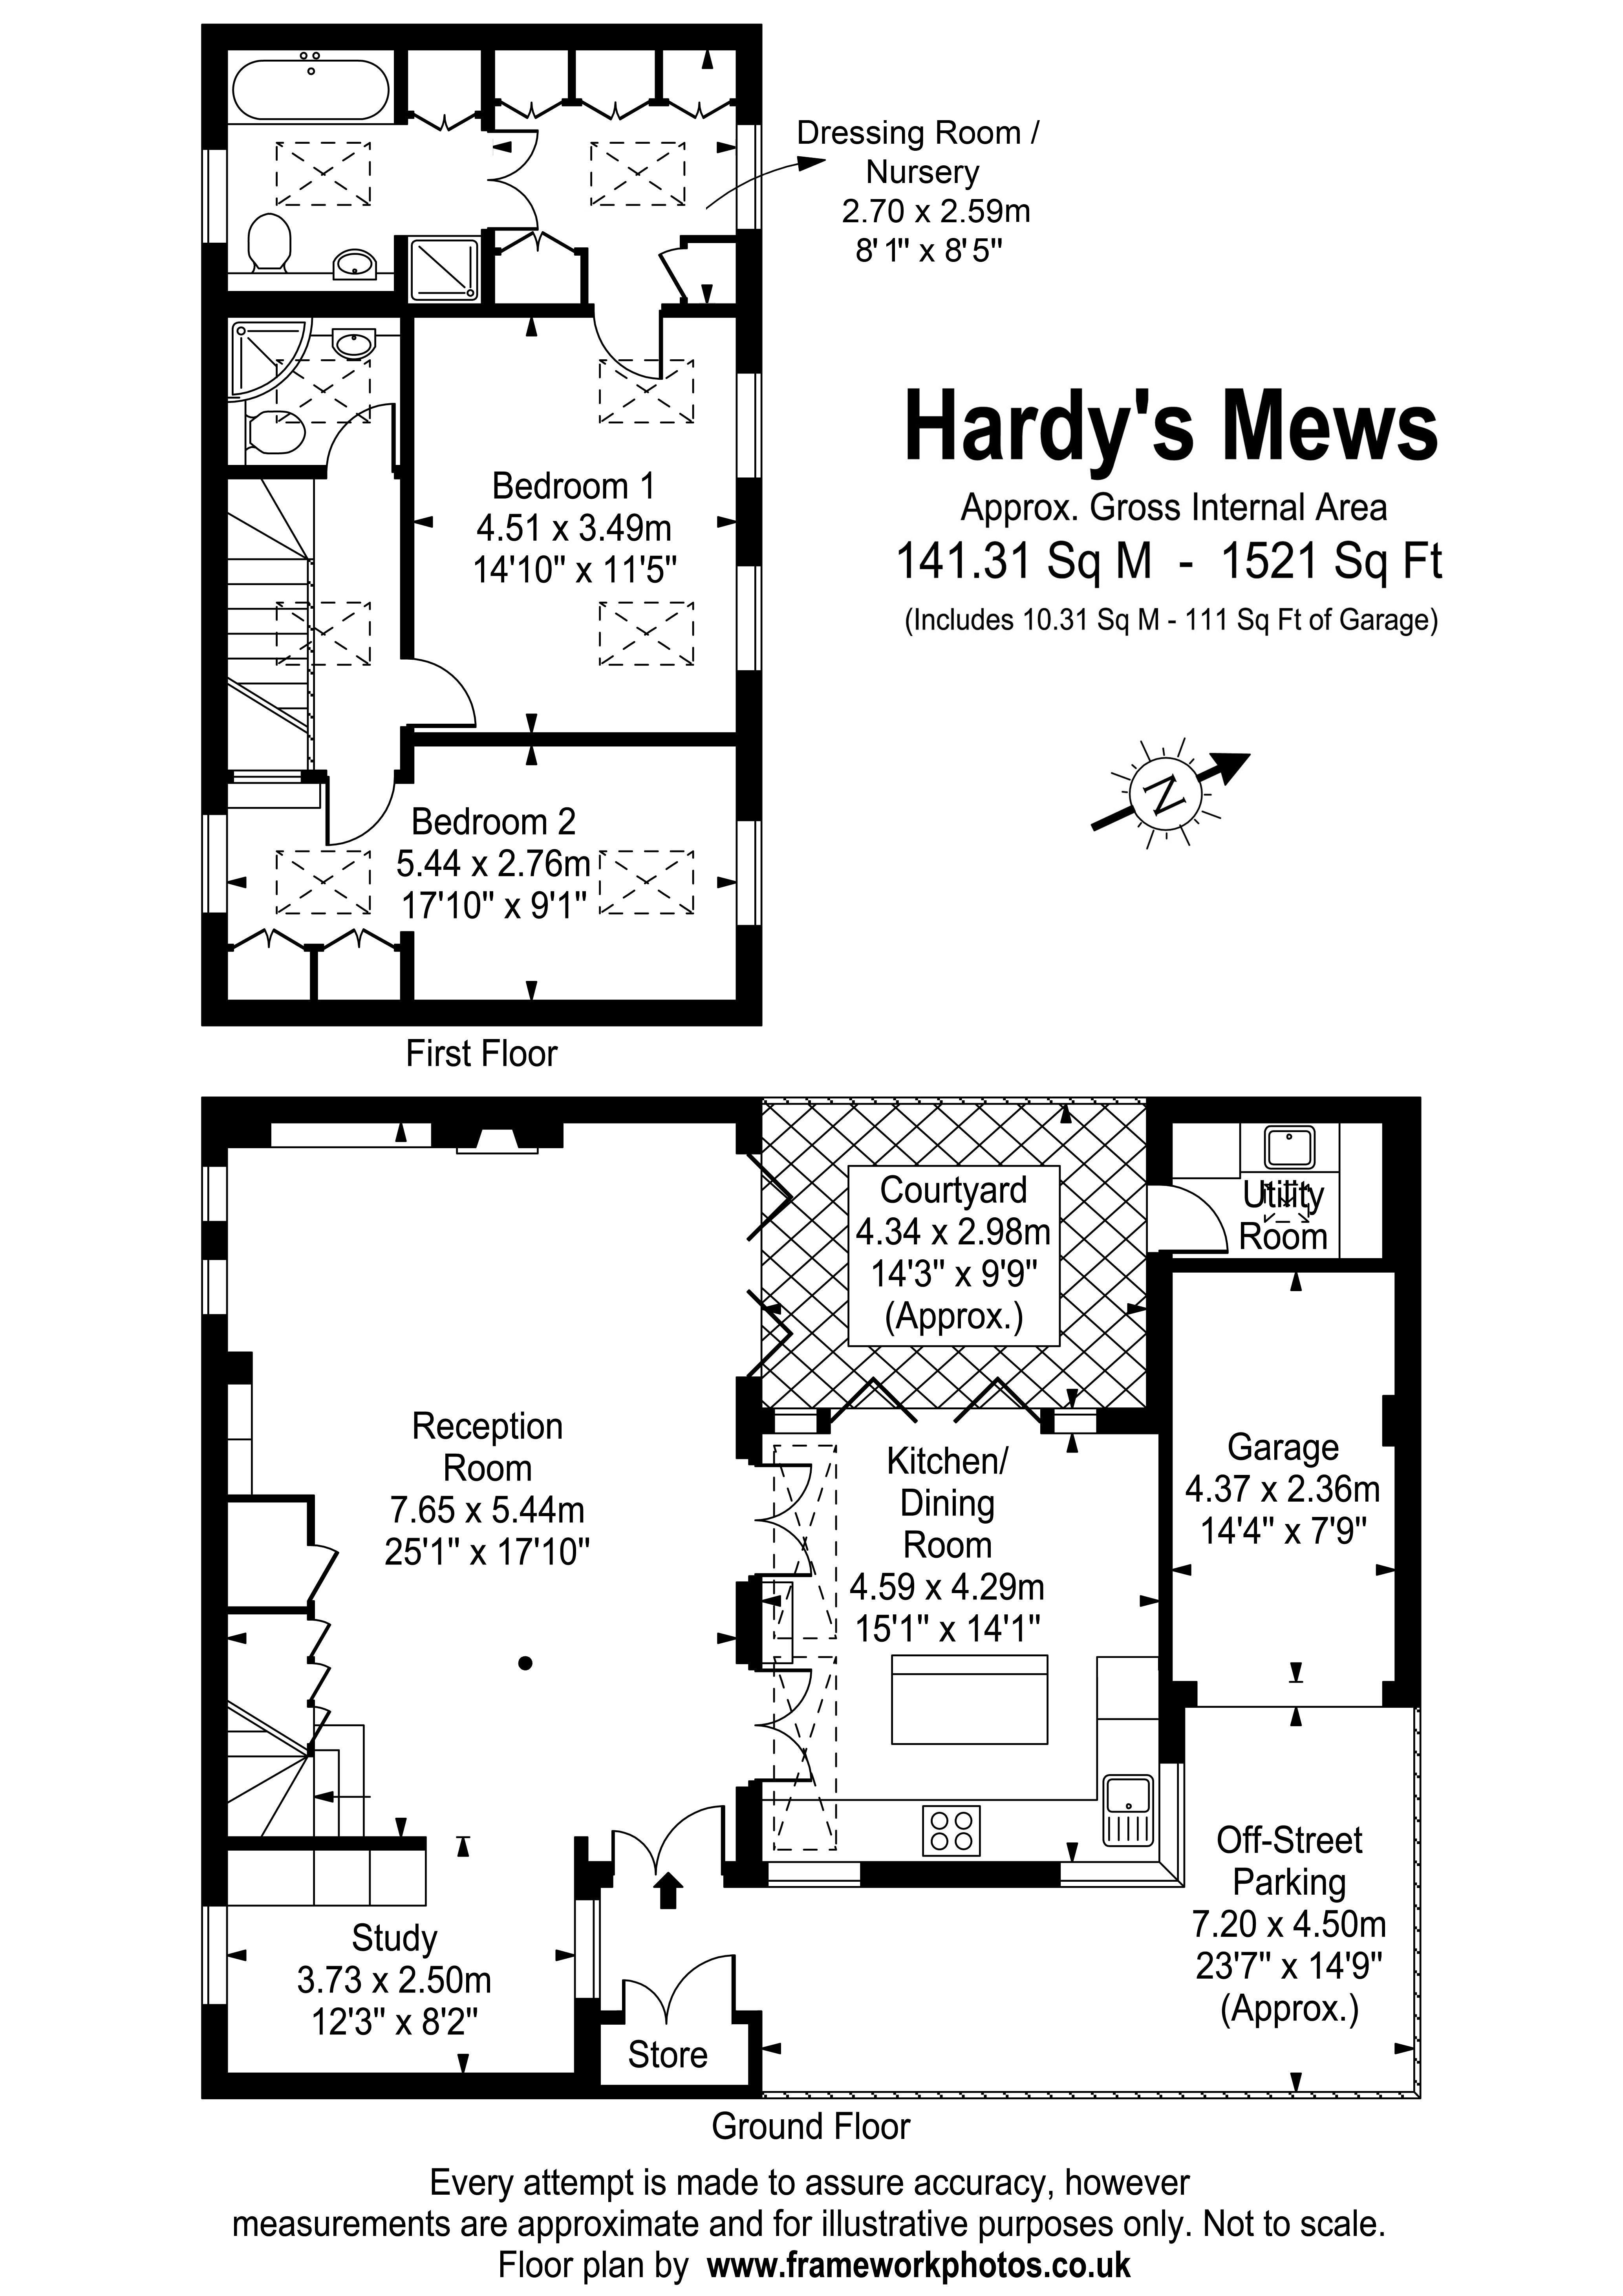 Floorplans For Hardy's Mews, East Molesey